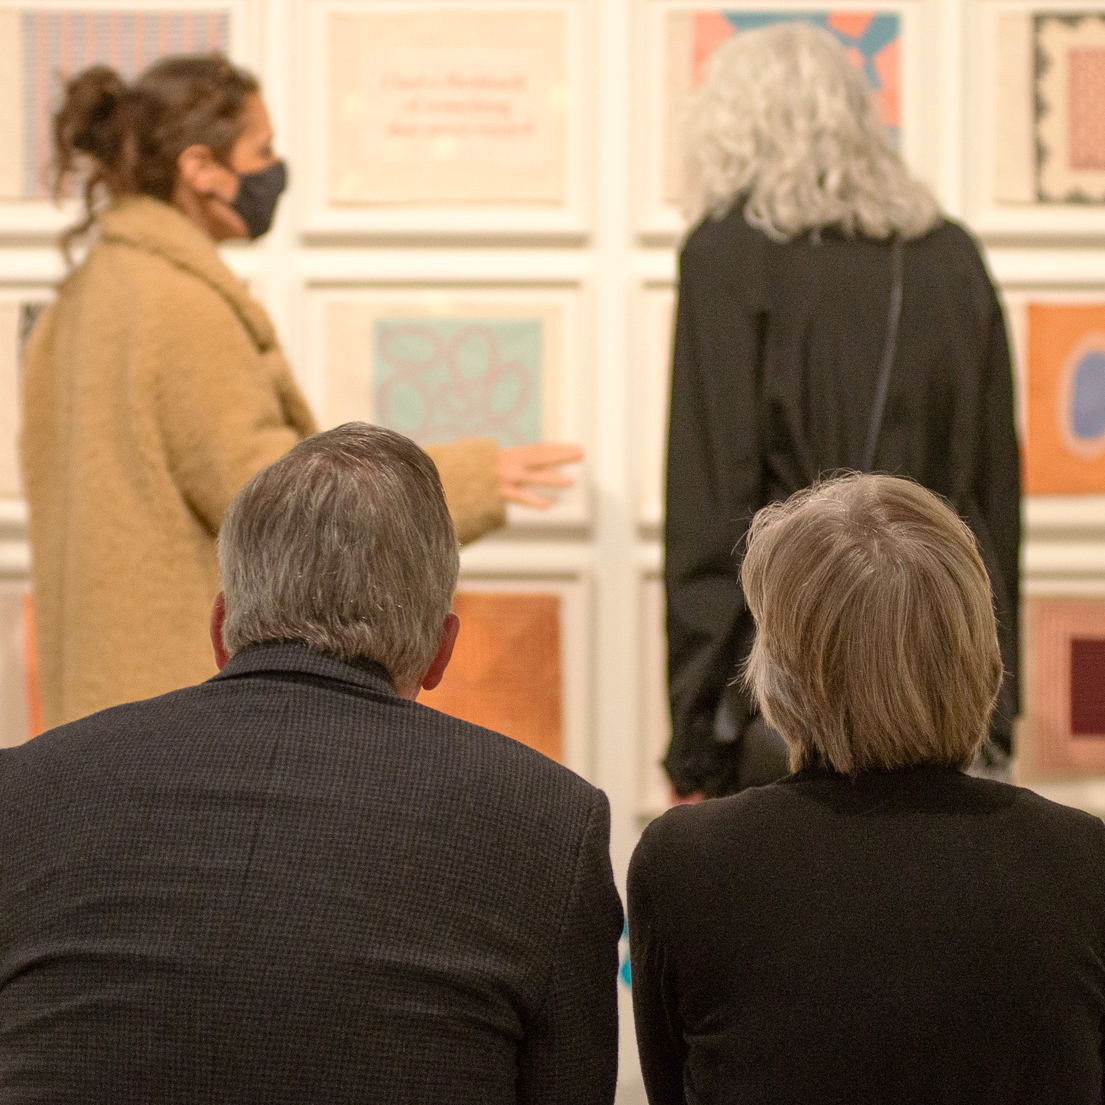 two seated people look on as a gallery attendant talks to a vistor about artwork on the wall. 